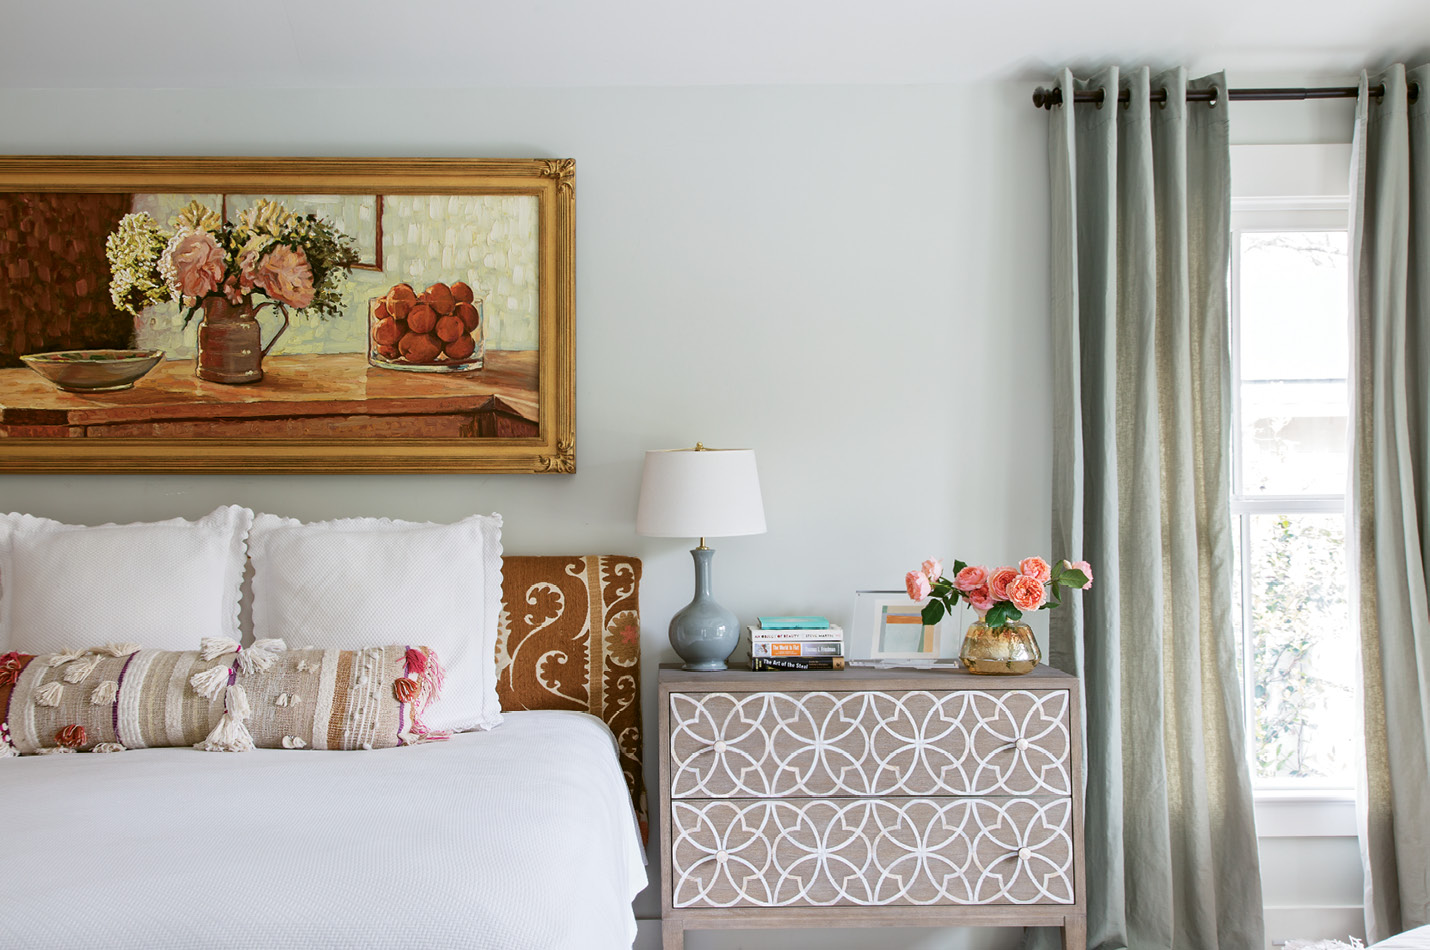 In the master suite, a Russian impressionist still life complements the Suzani embroidered headboard.